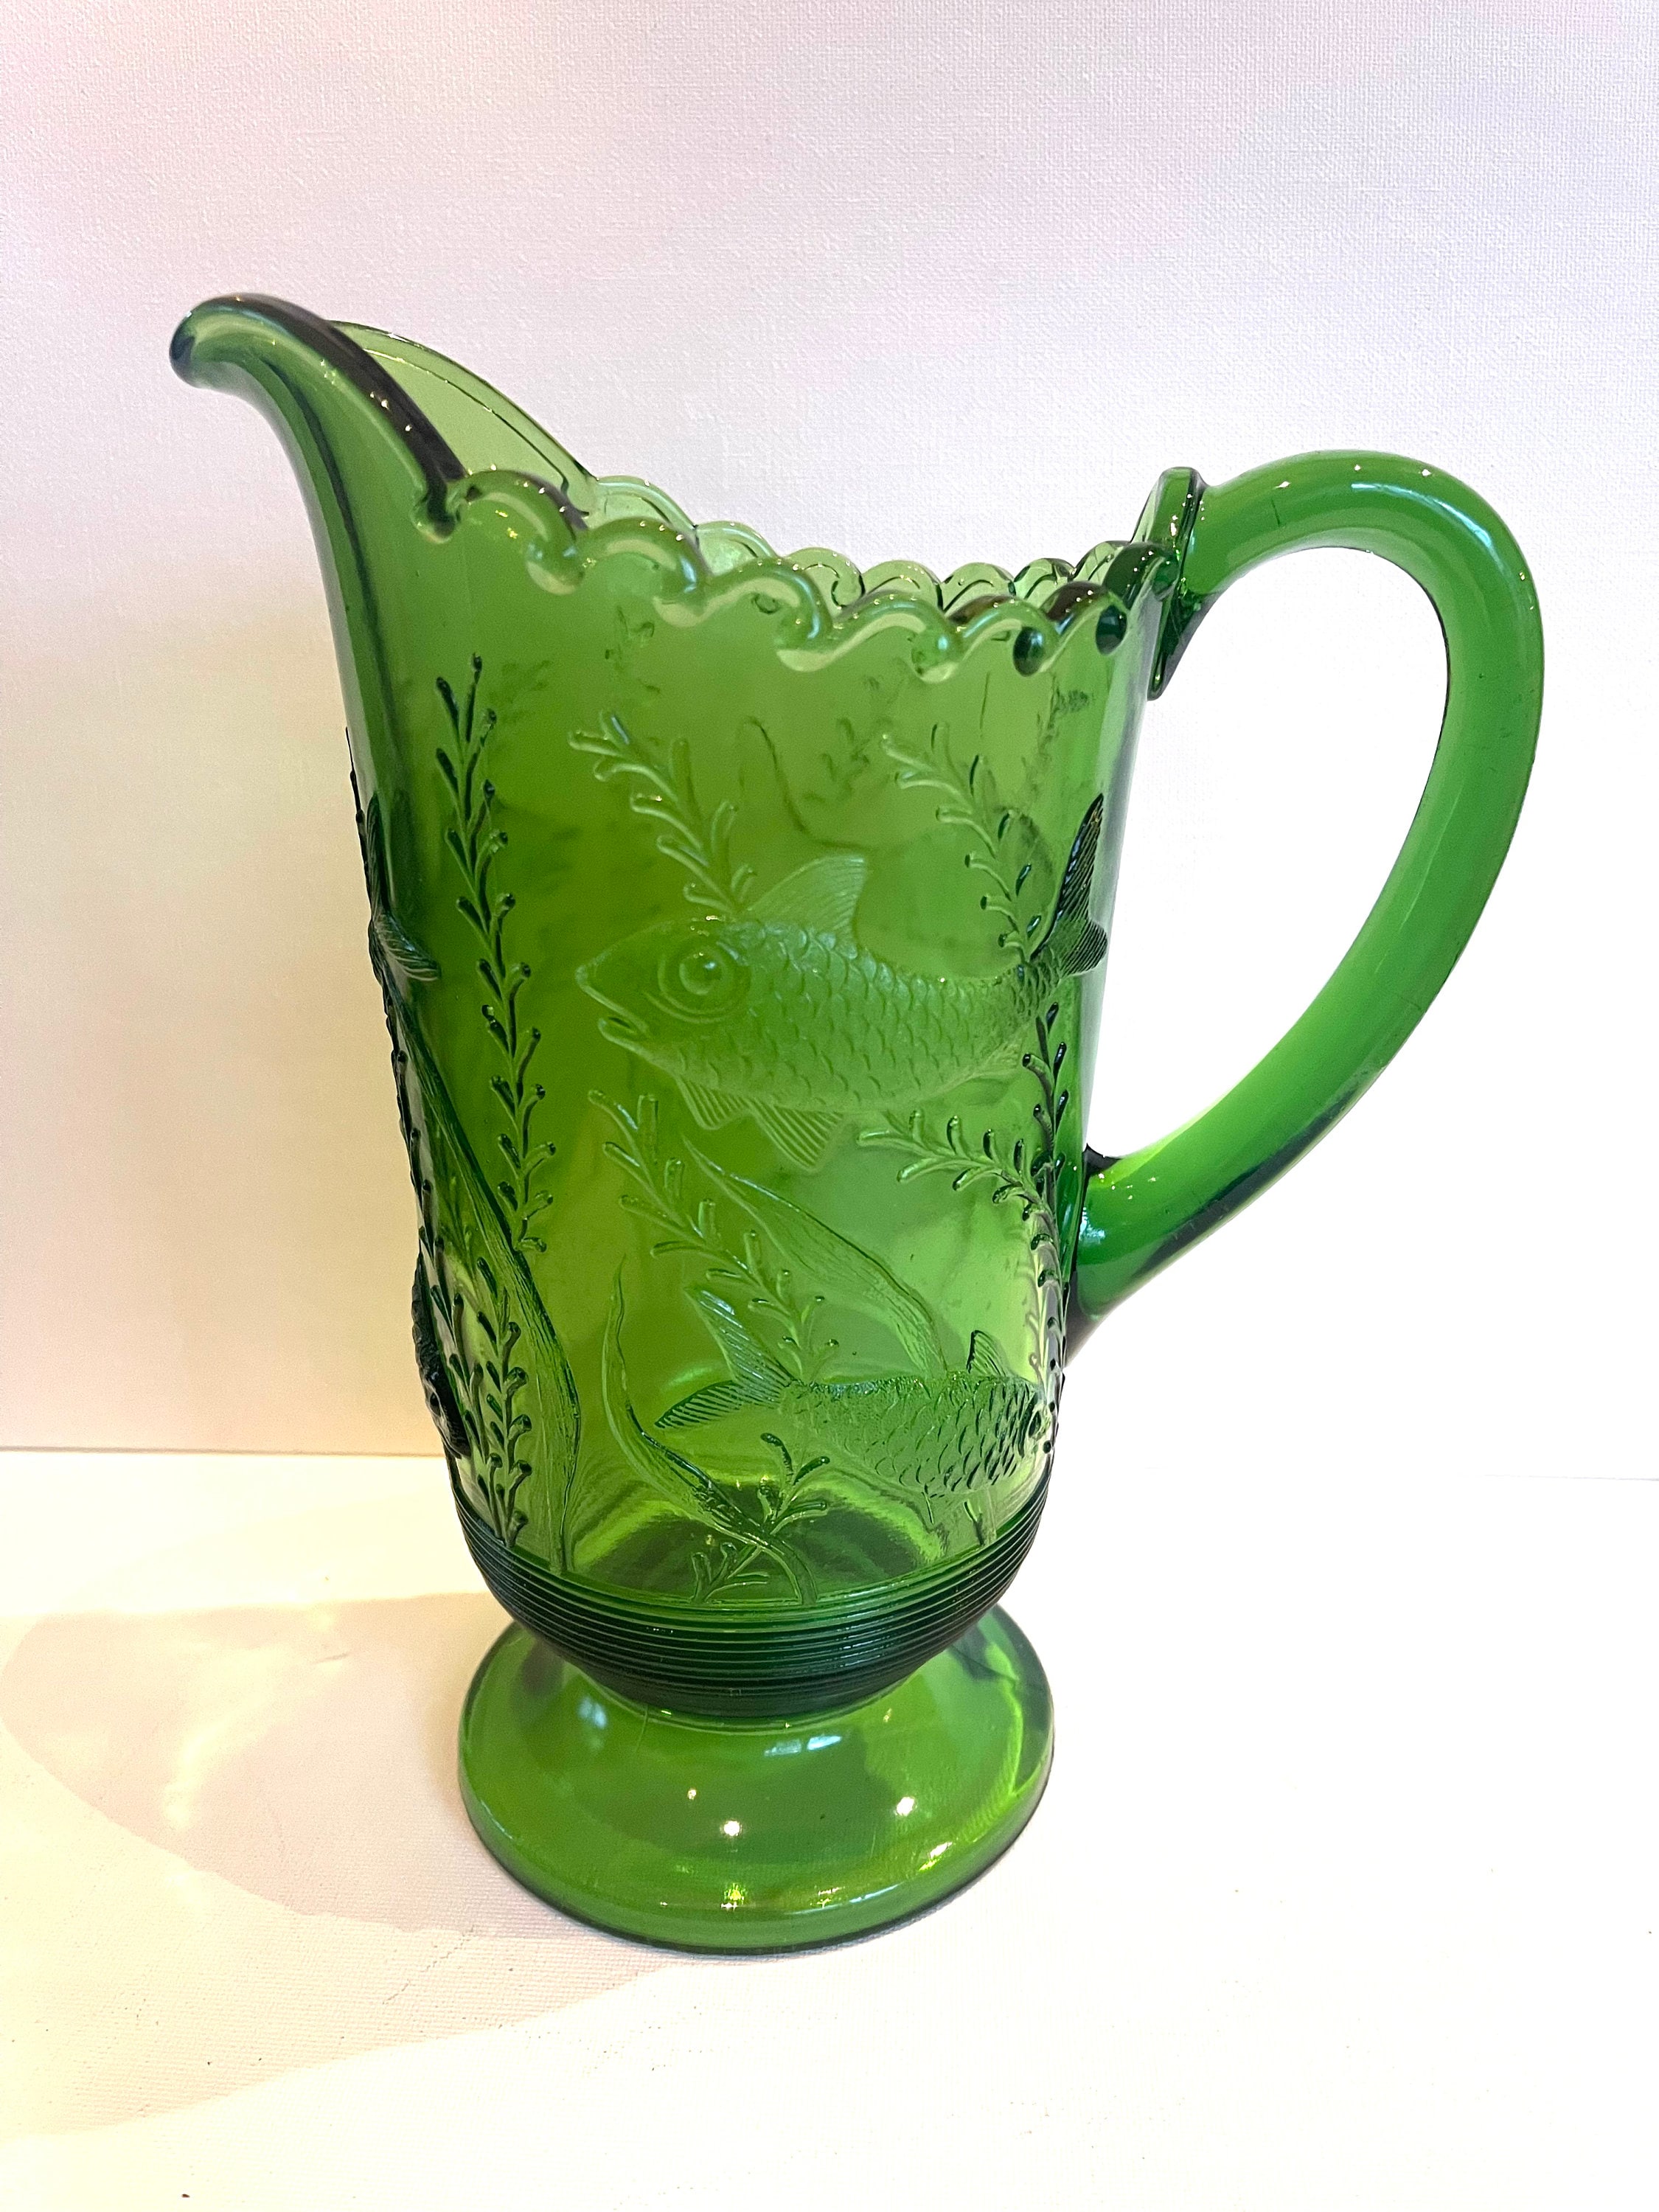 Traditional - Water Pitcher - DW1564